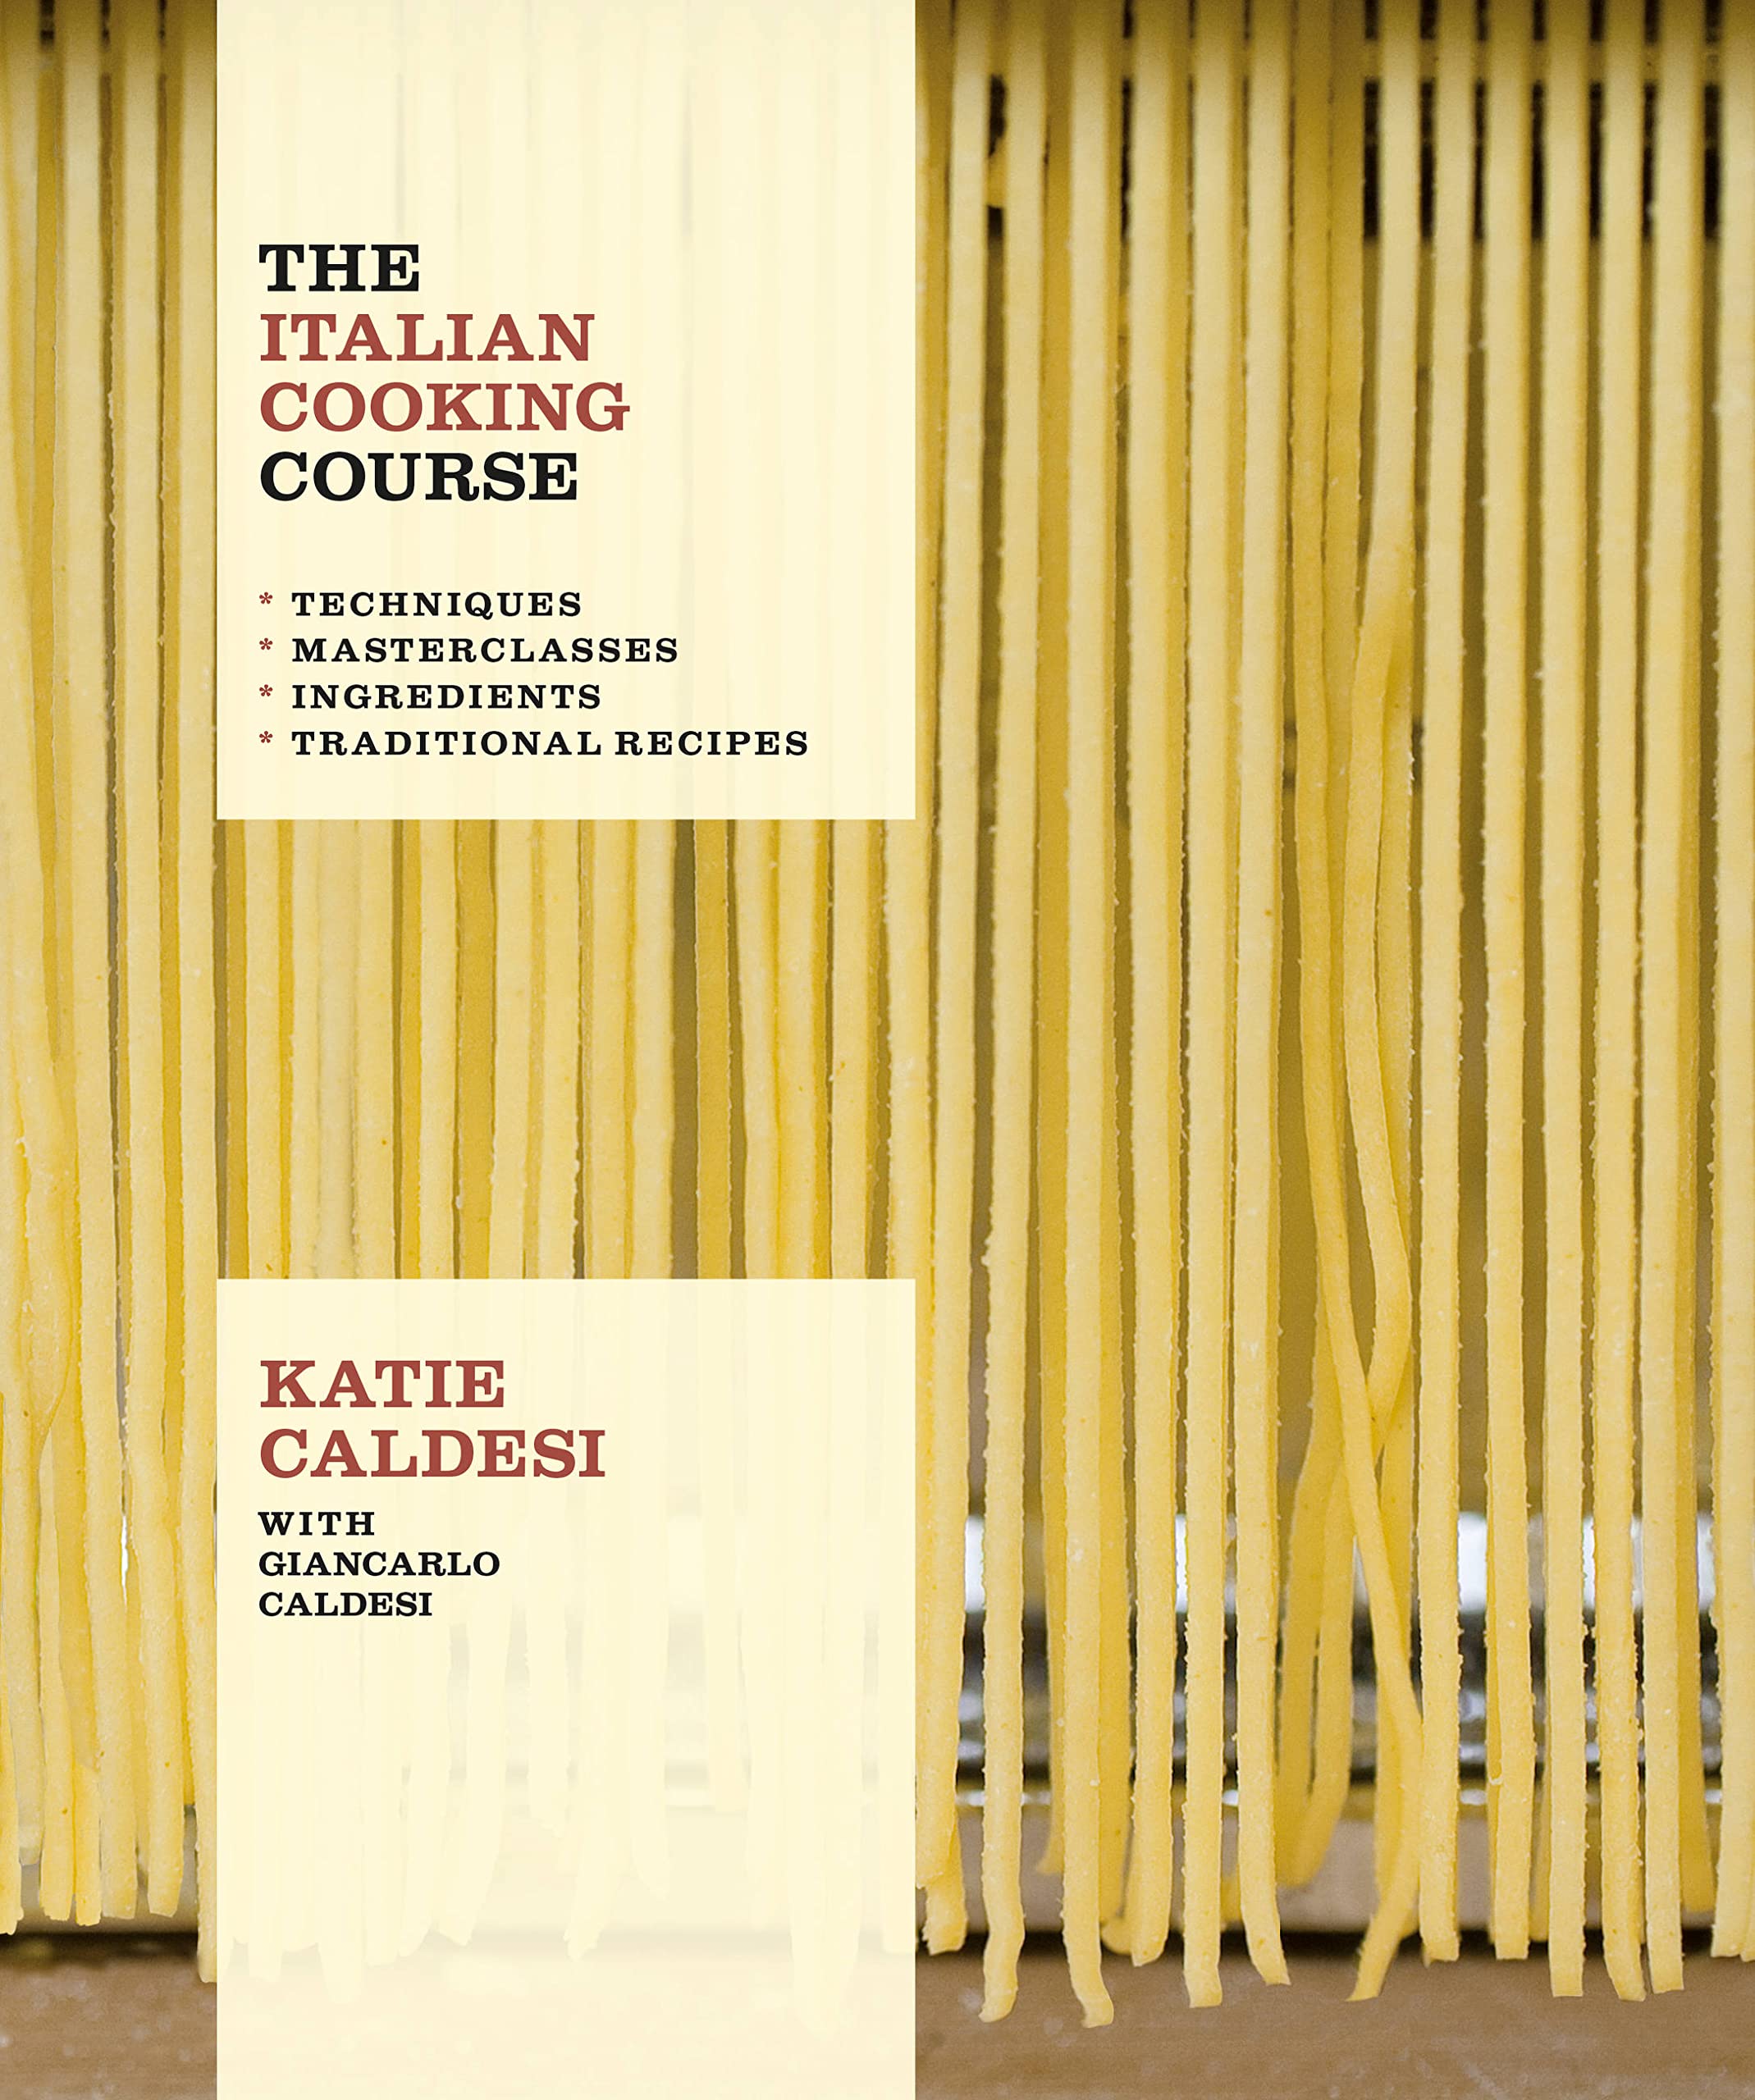 The Italian Cooking Course: Techniques. Masterclasses. Ingredients. Traditional Recipes (Katie Caldesi)